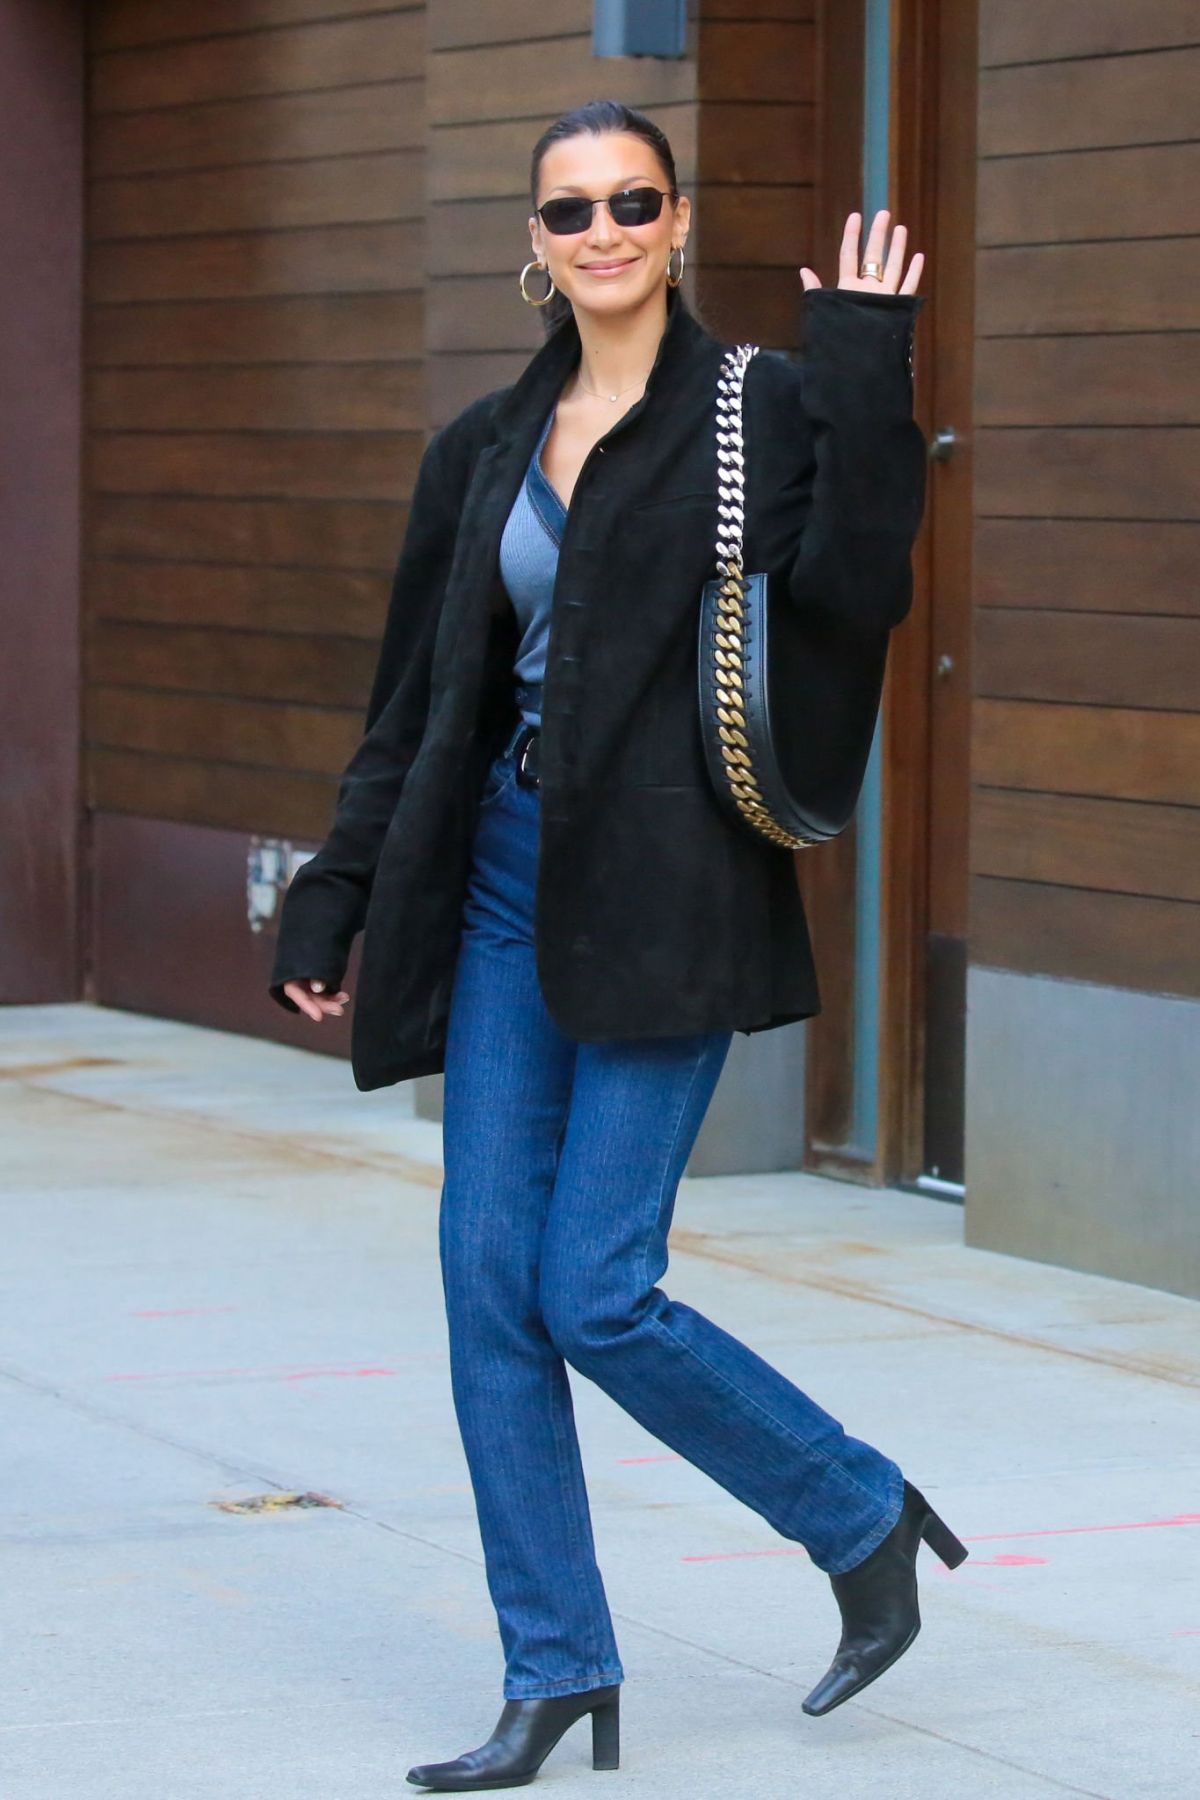 Bella Hadid in Blue V-Neck and Stella McCartney Bag in NYC